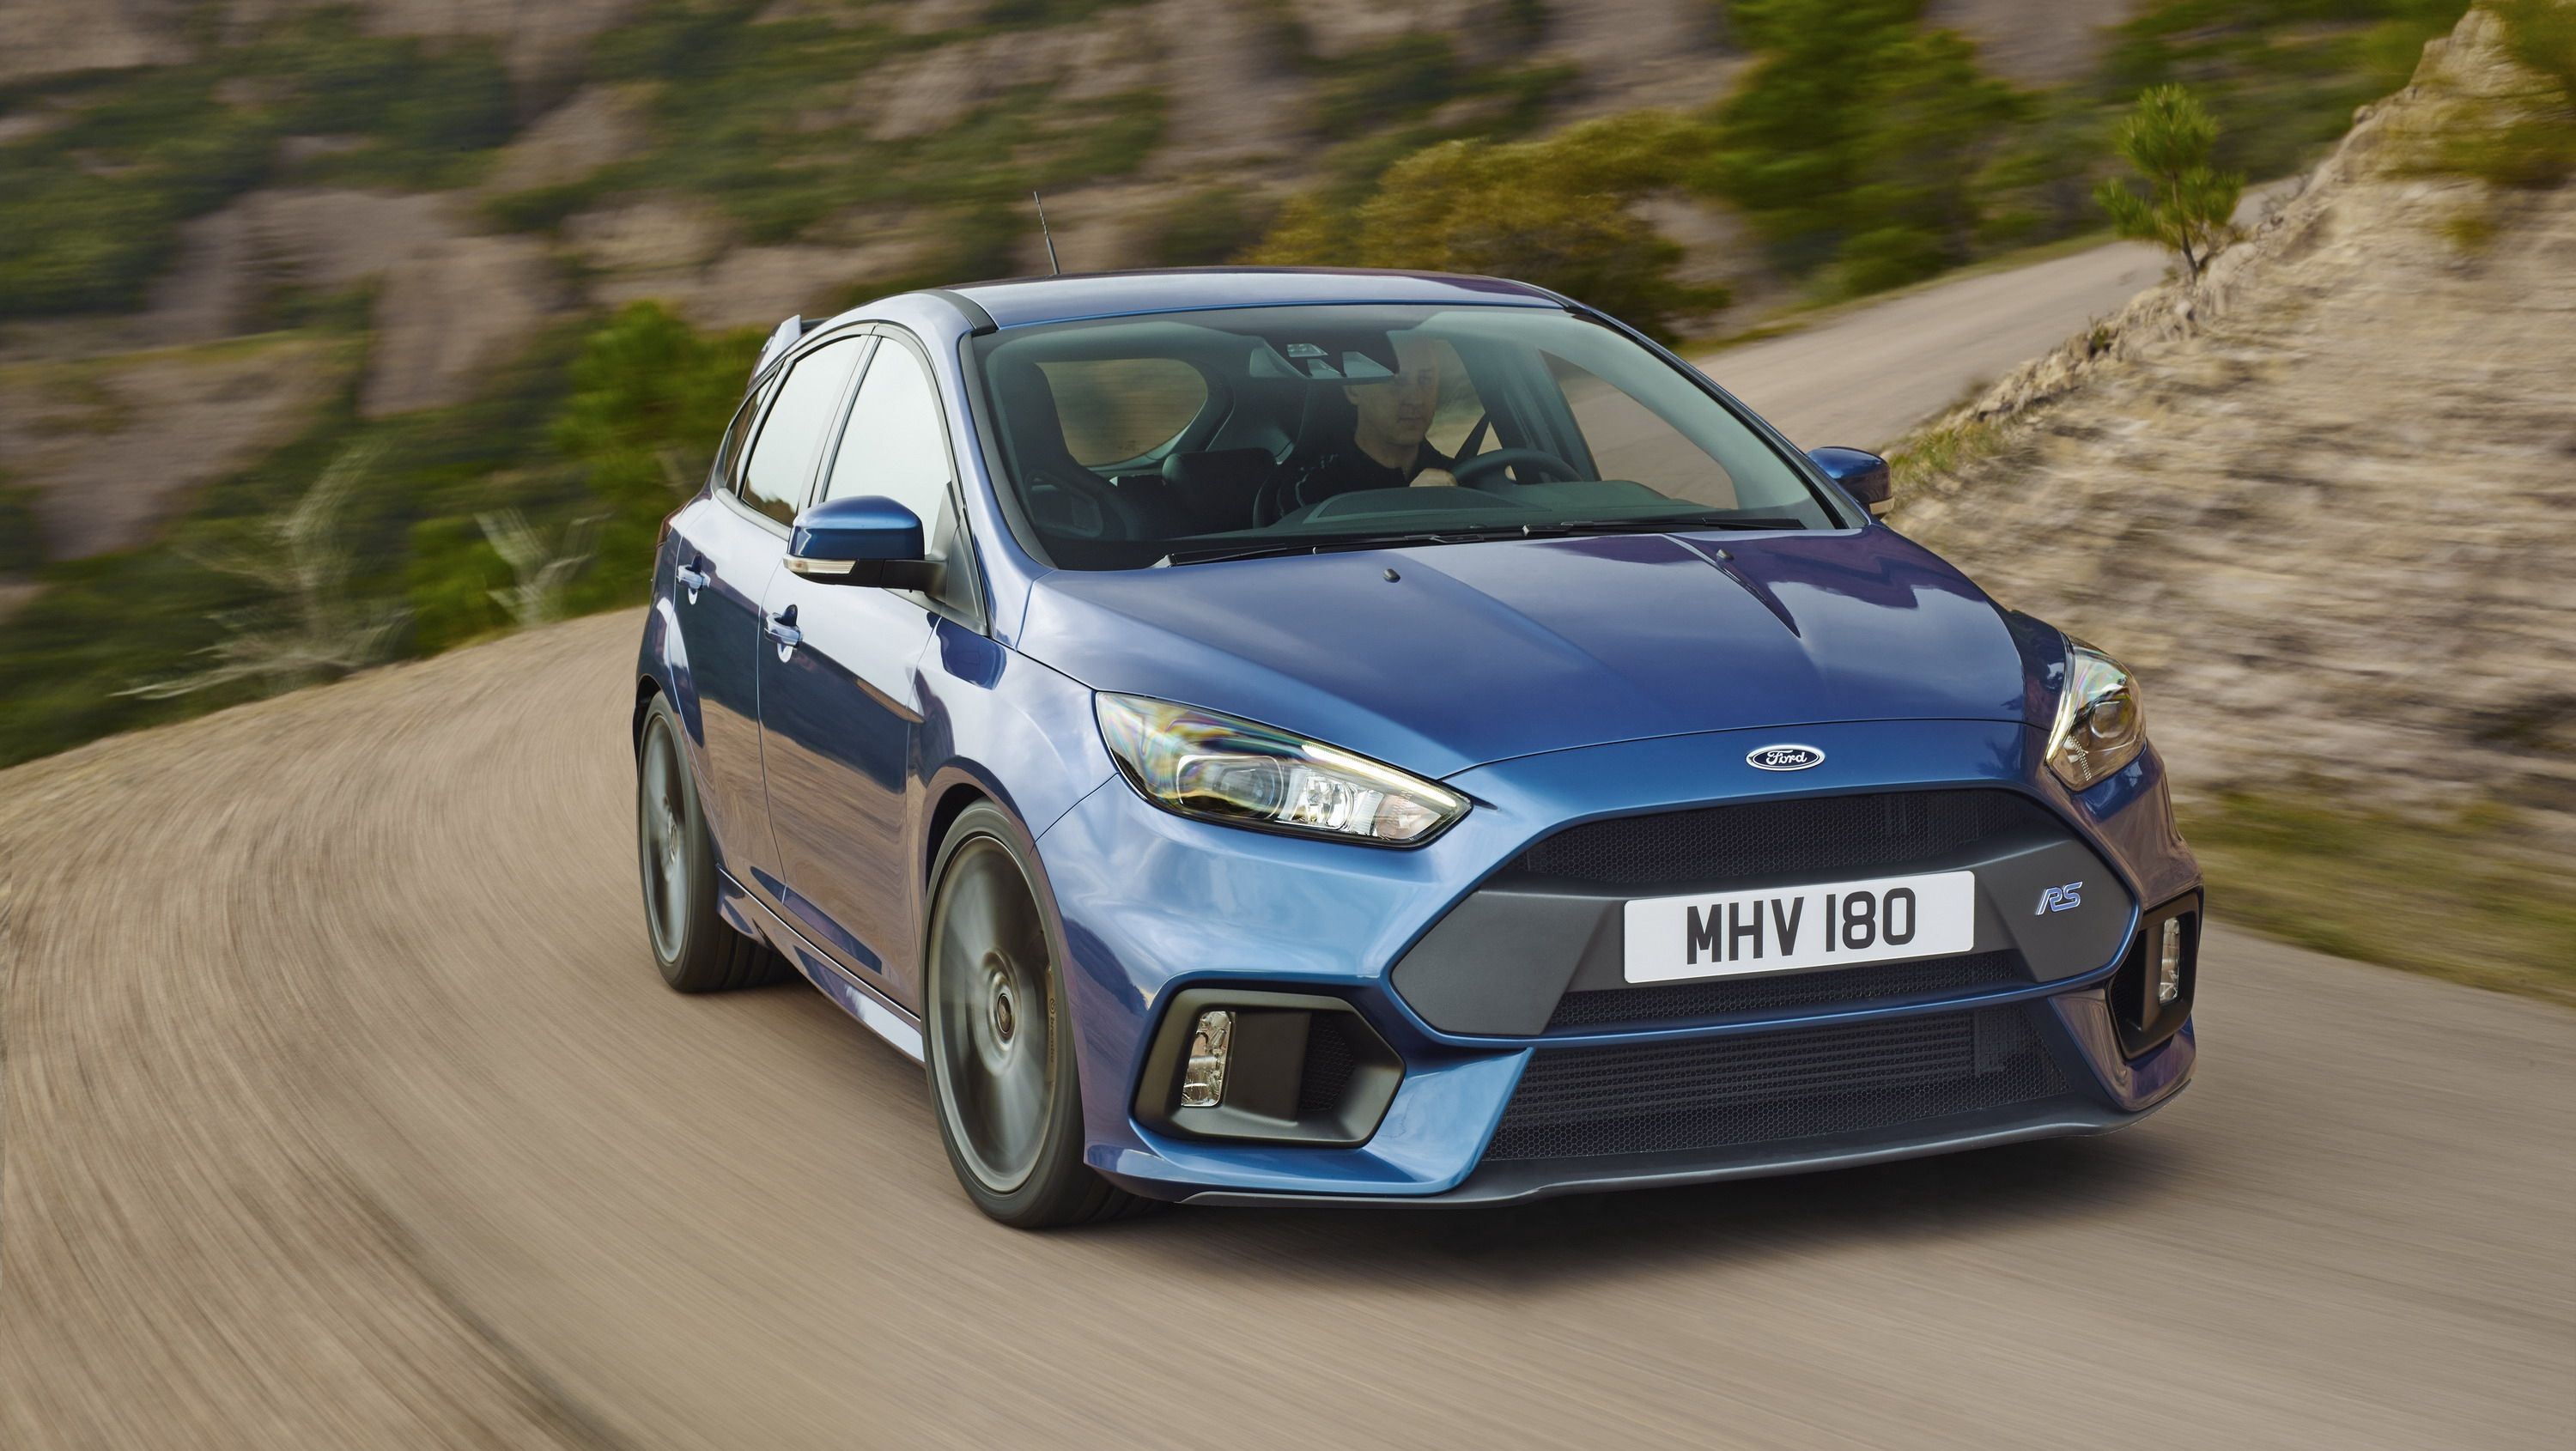 2019 Is The Next-Gen Ford Focus RS Going to Come With a Hybrid?